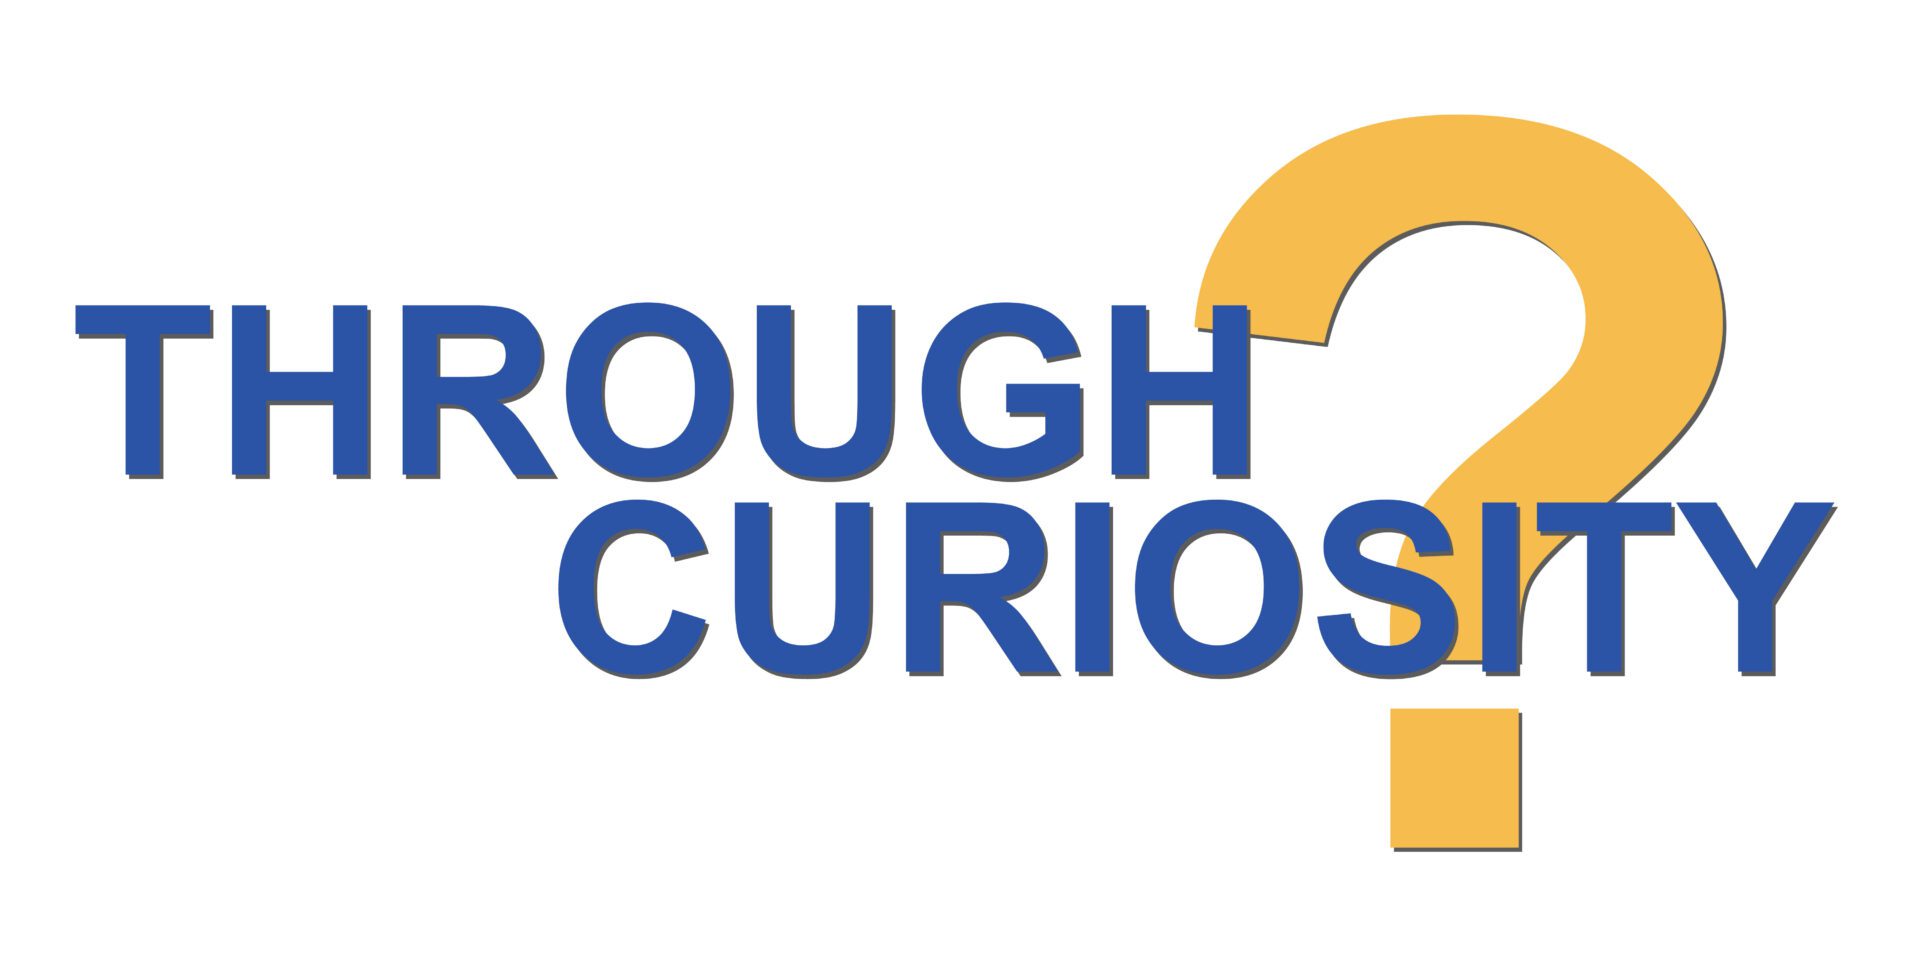 A blue and yellow question mark with the words " rough curios ?" underneath.